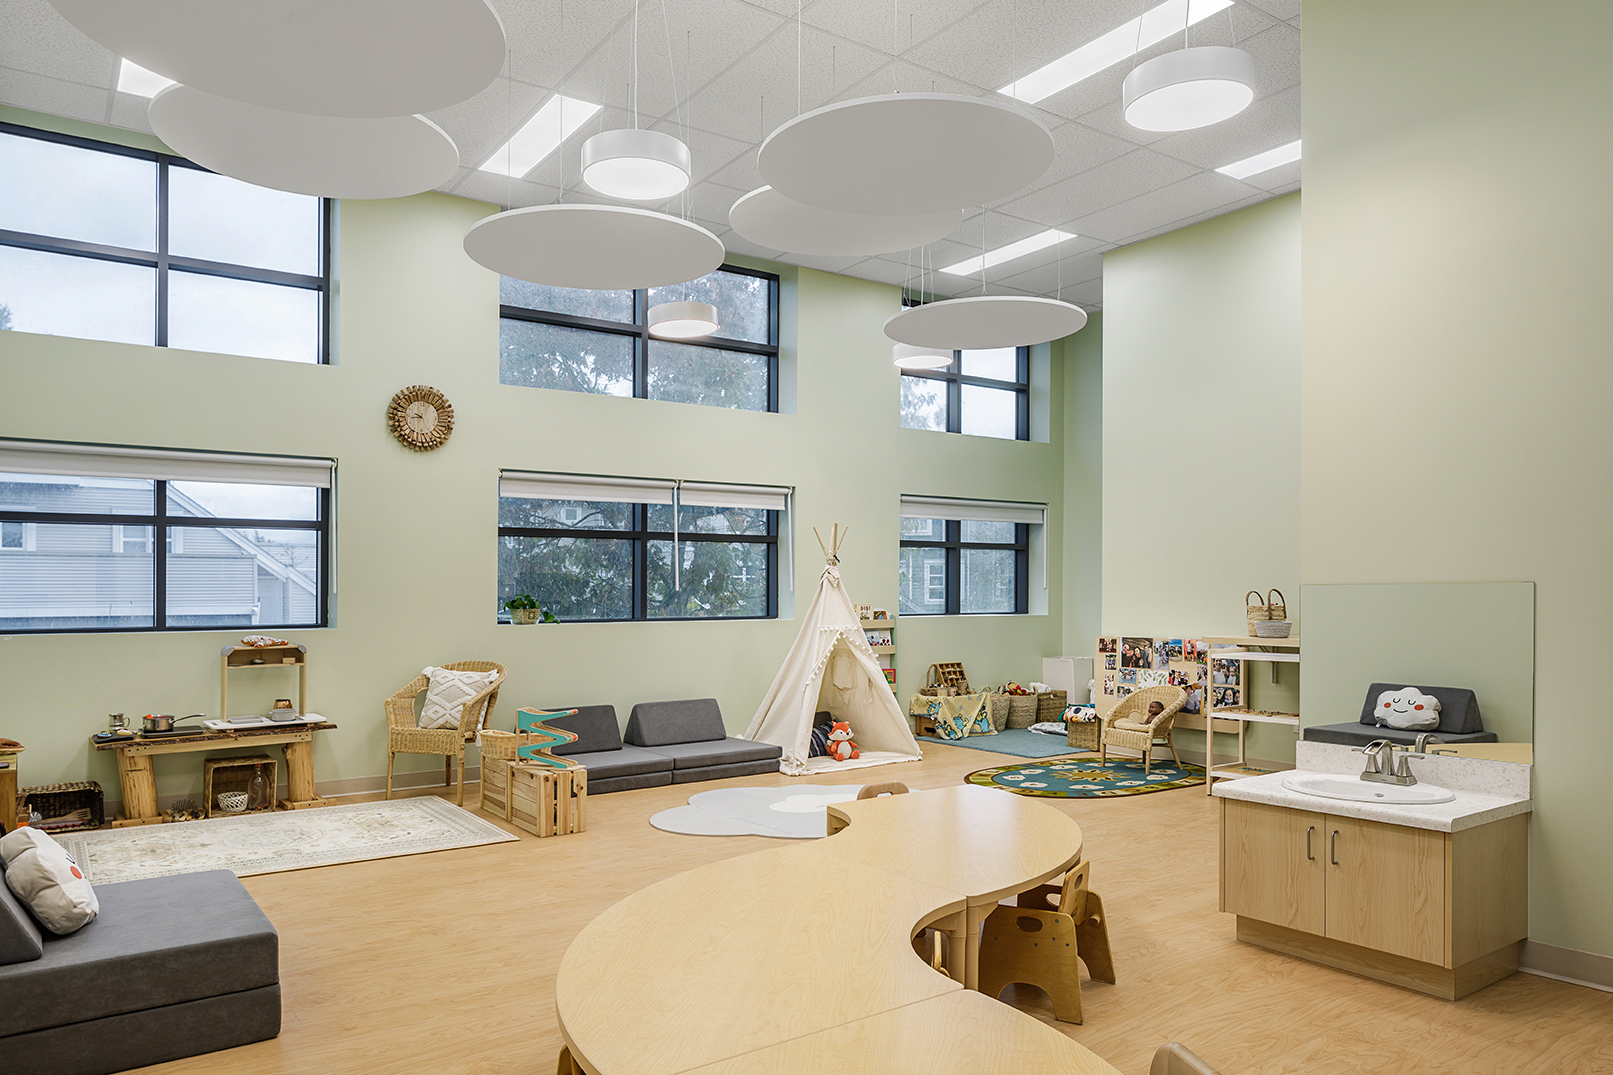 Classroom, millwork, lighting, , Aves Early Education in Richmond BC, by Cutler